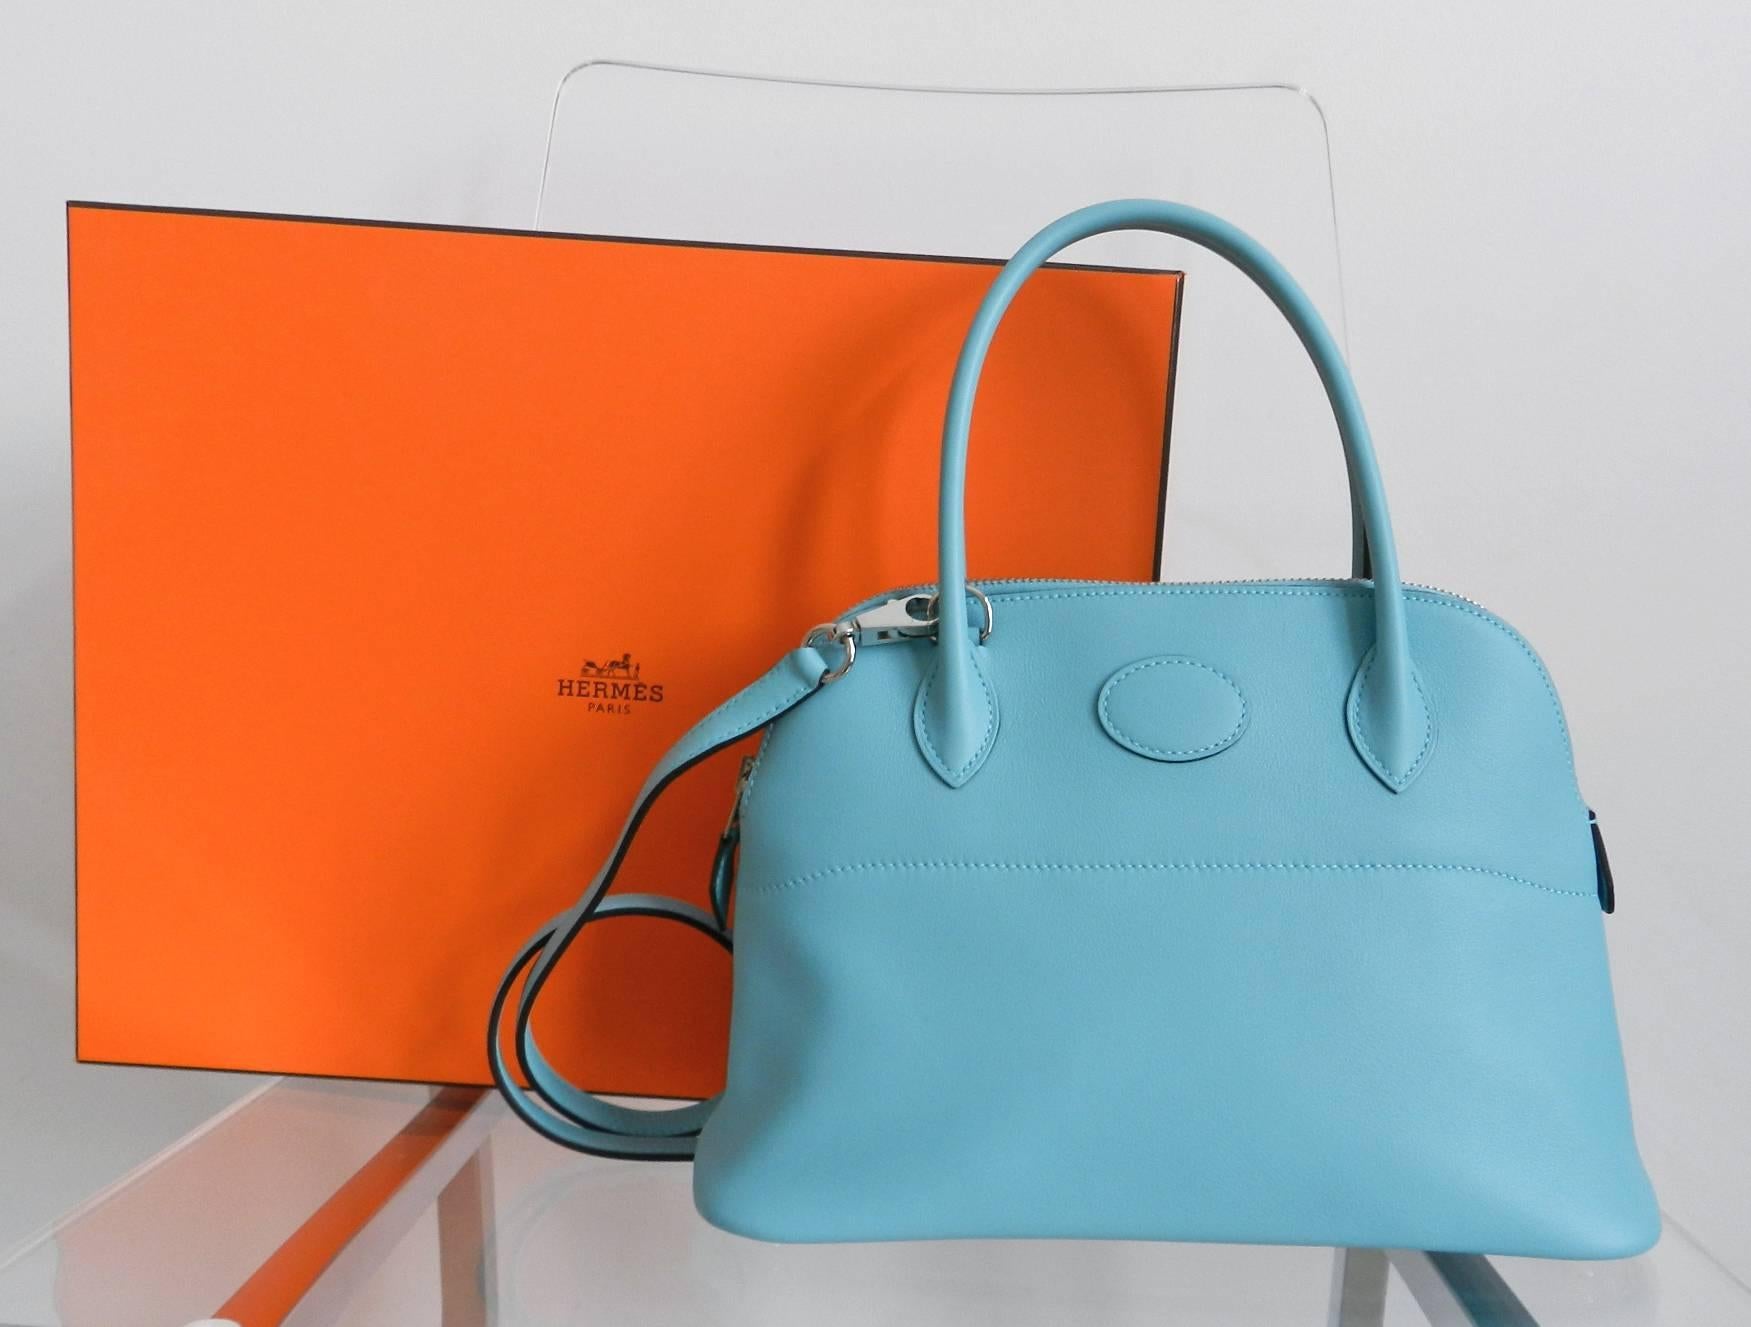 Hermes bolide 27cm in vibrant turquoise blue atoll.  Soft veau sombrero leather and palladium hardware.  Fully outfitted with strap, duster, strap duster, raincoat, and original purchase receipt. Excellent pre-owned condition - carried once. Date